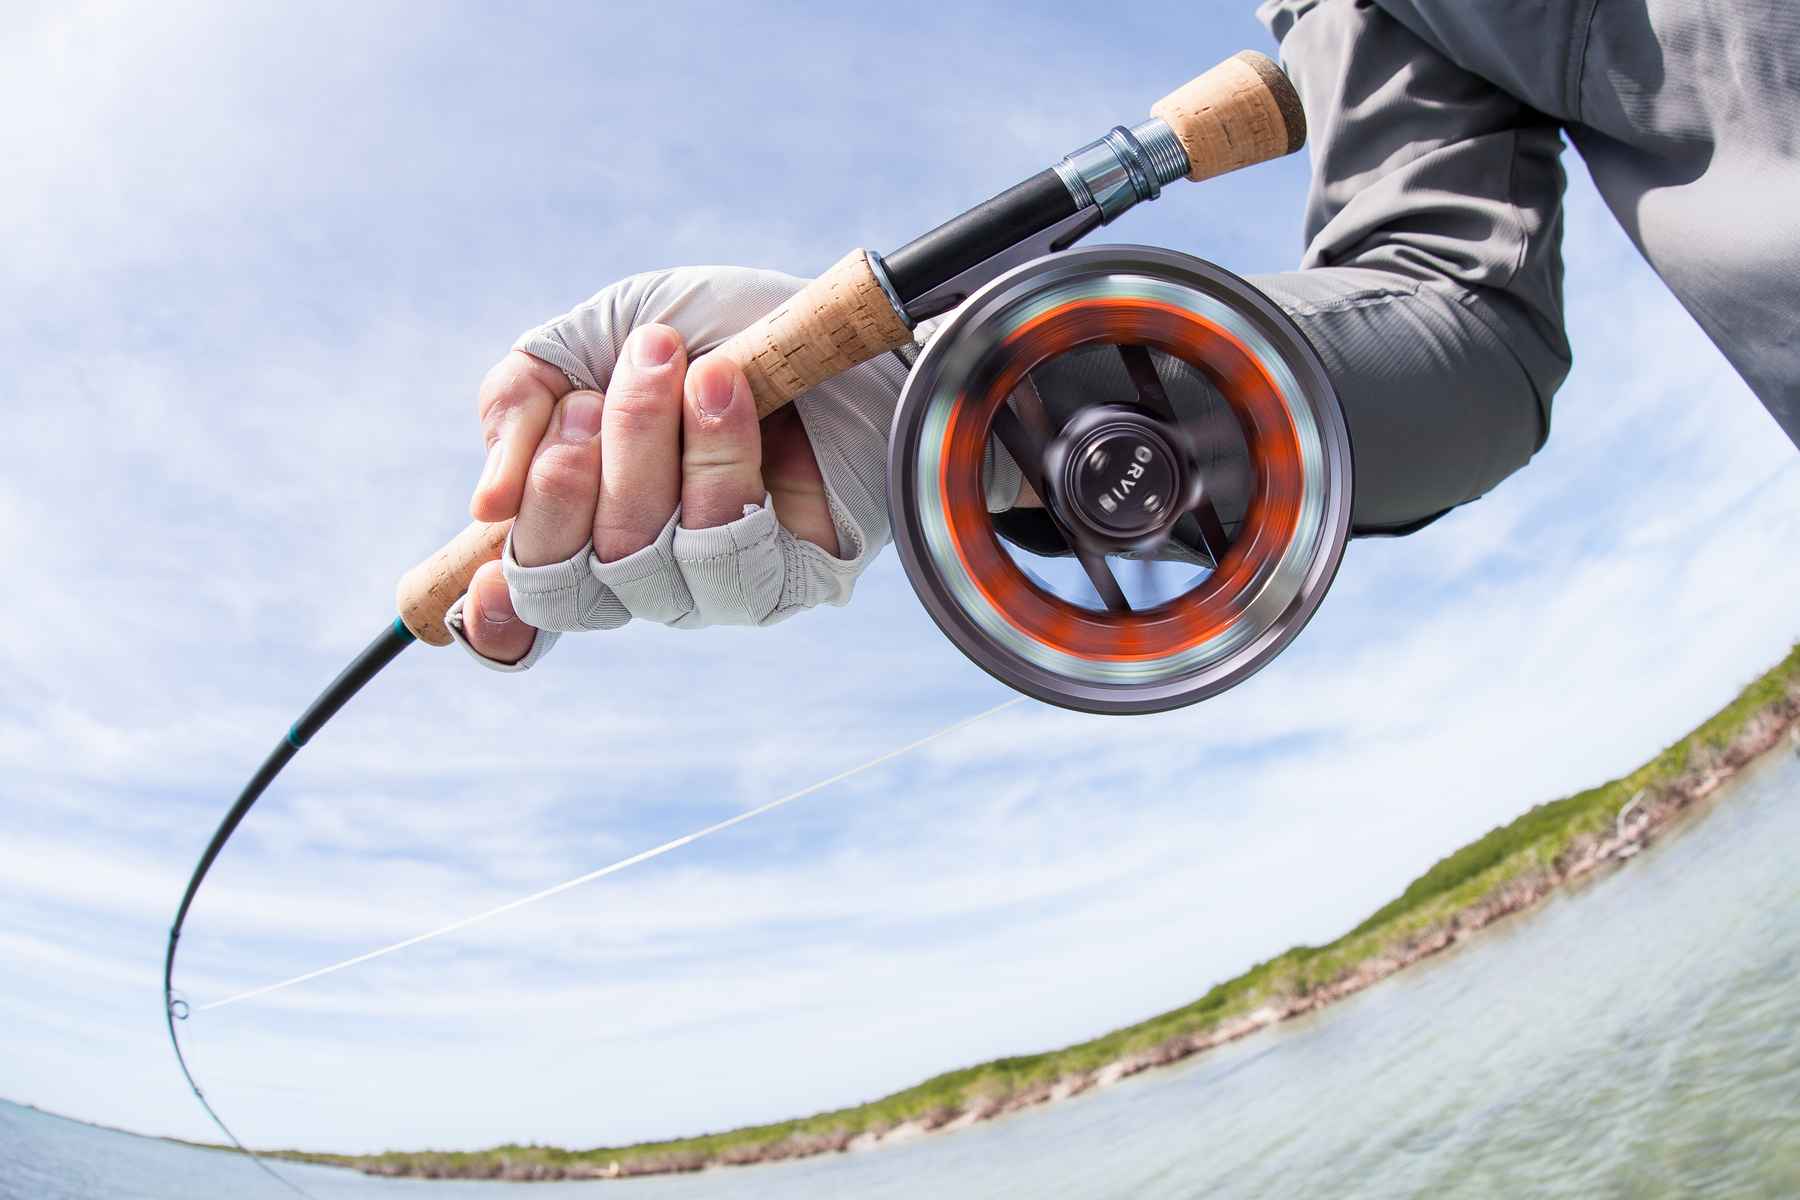 Is your fly fishing gear ready for the season?